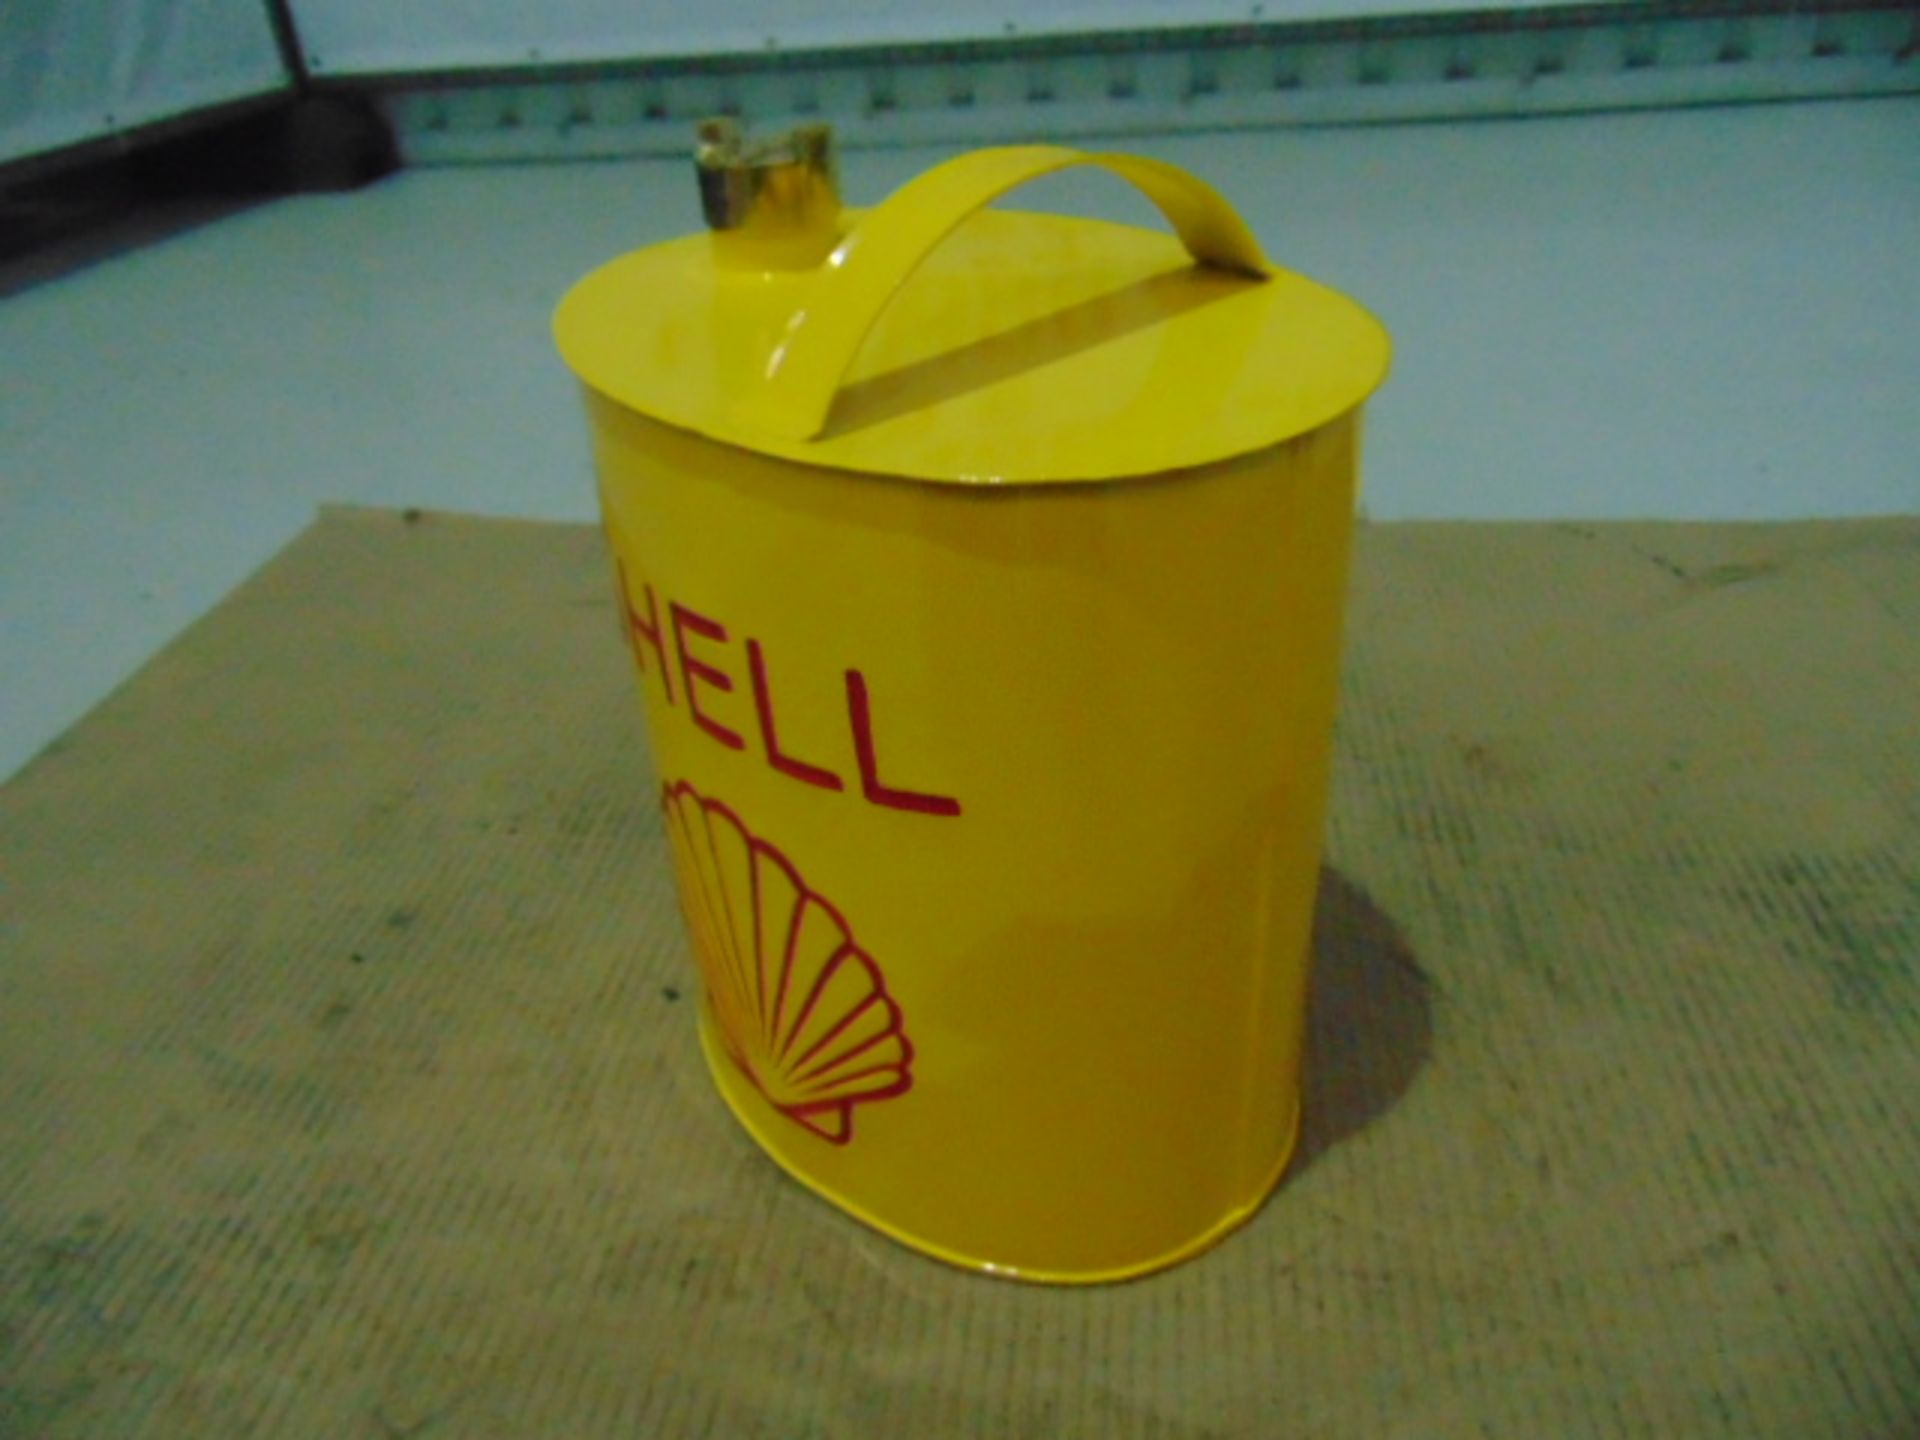 Shell Branded Oil Can - Image 3 of 6